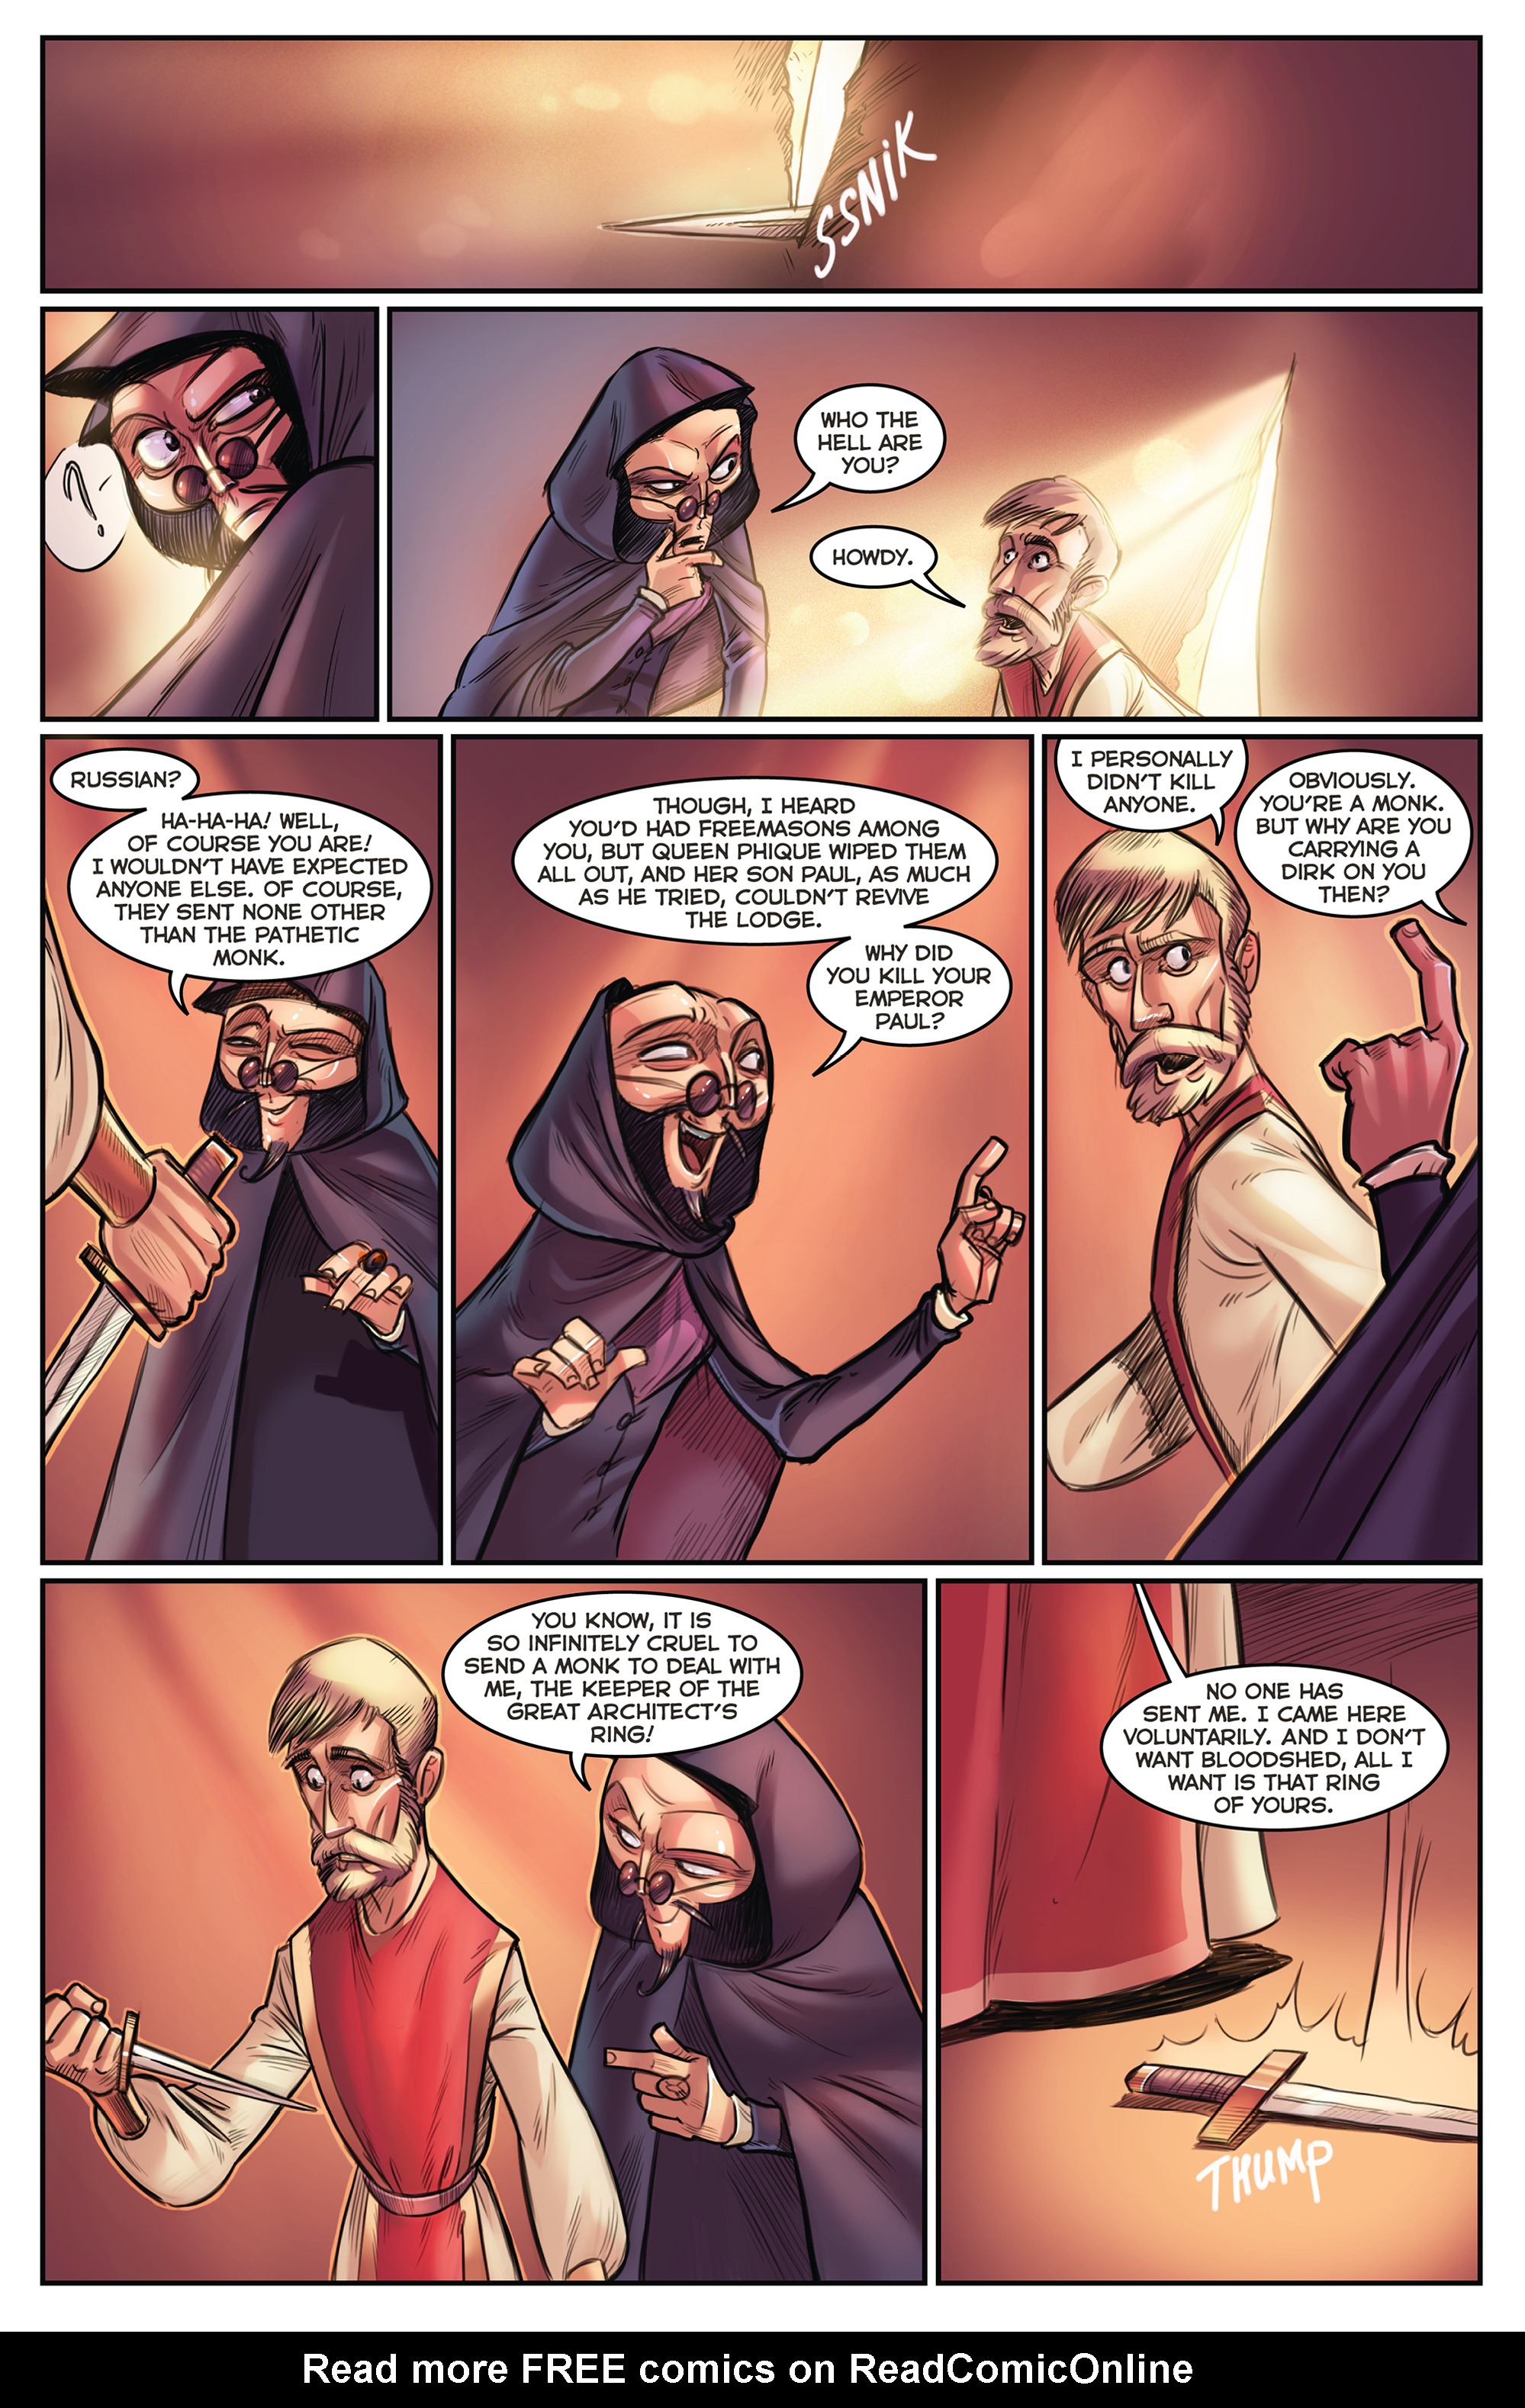 Read online Friar comic -  Issue #7 - 11